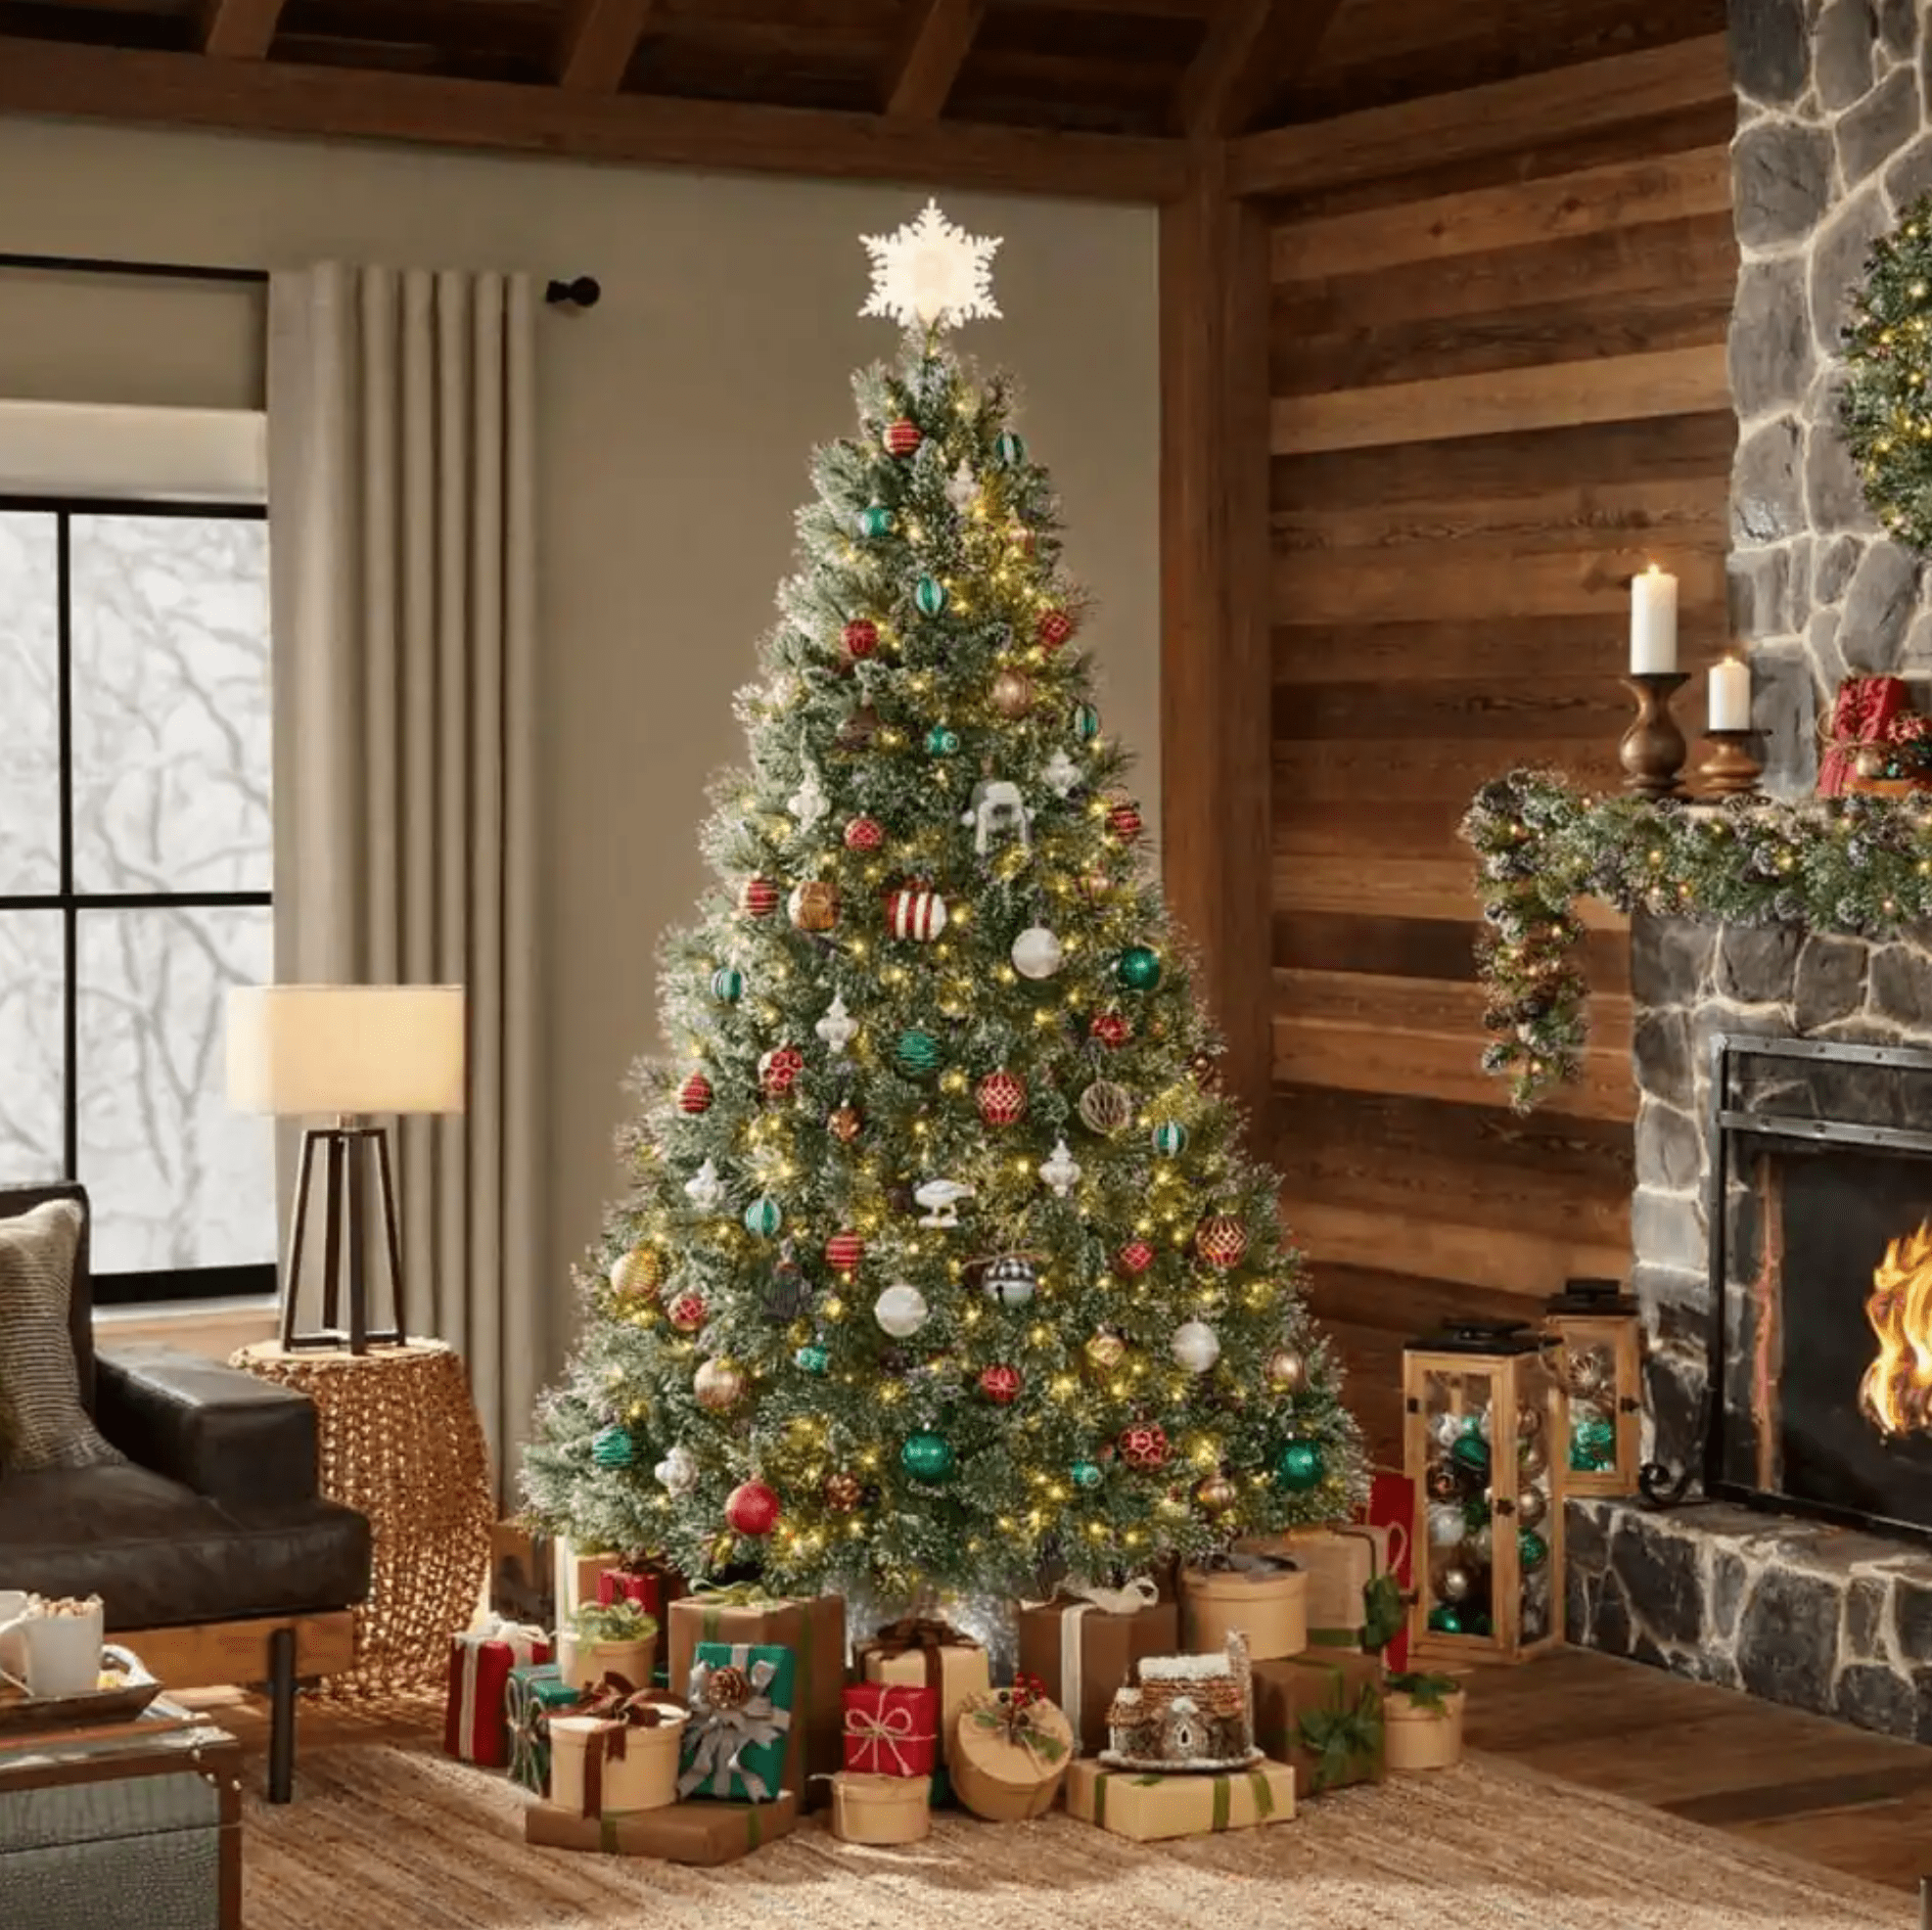 Christmas Tree Prices Are Going Up in 2022—Here's Why & How to Save